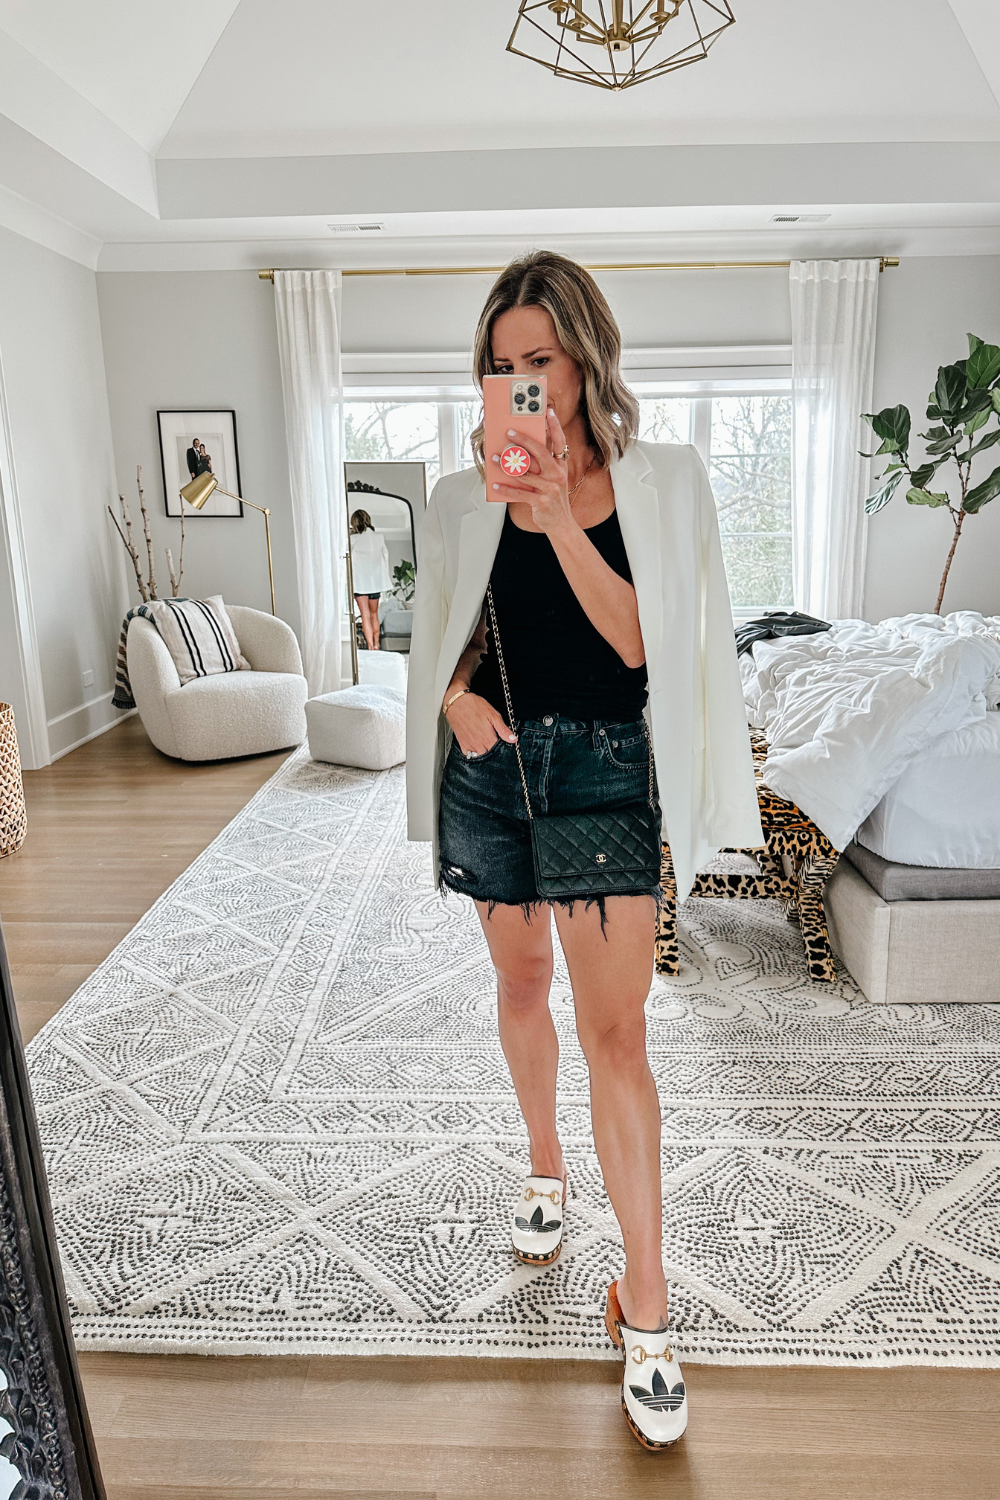 Suzanne wearing a blazer and denim shorts for date night